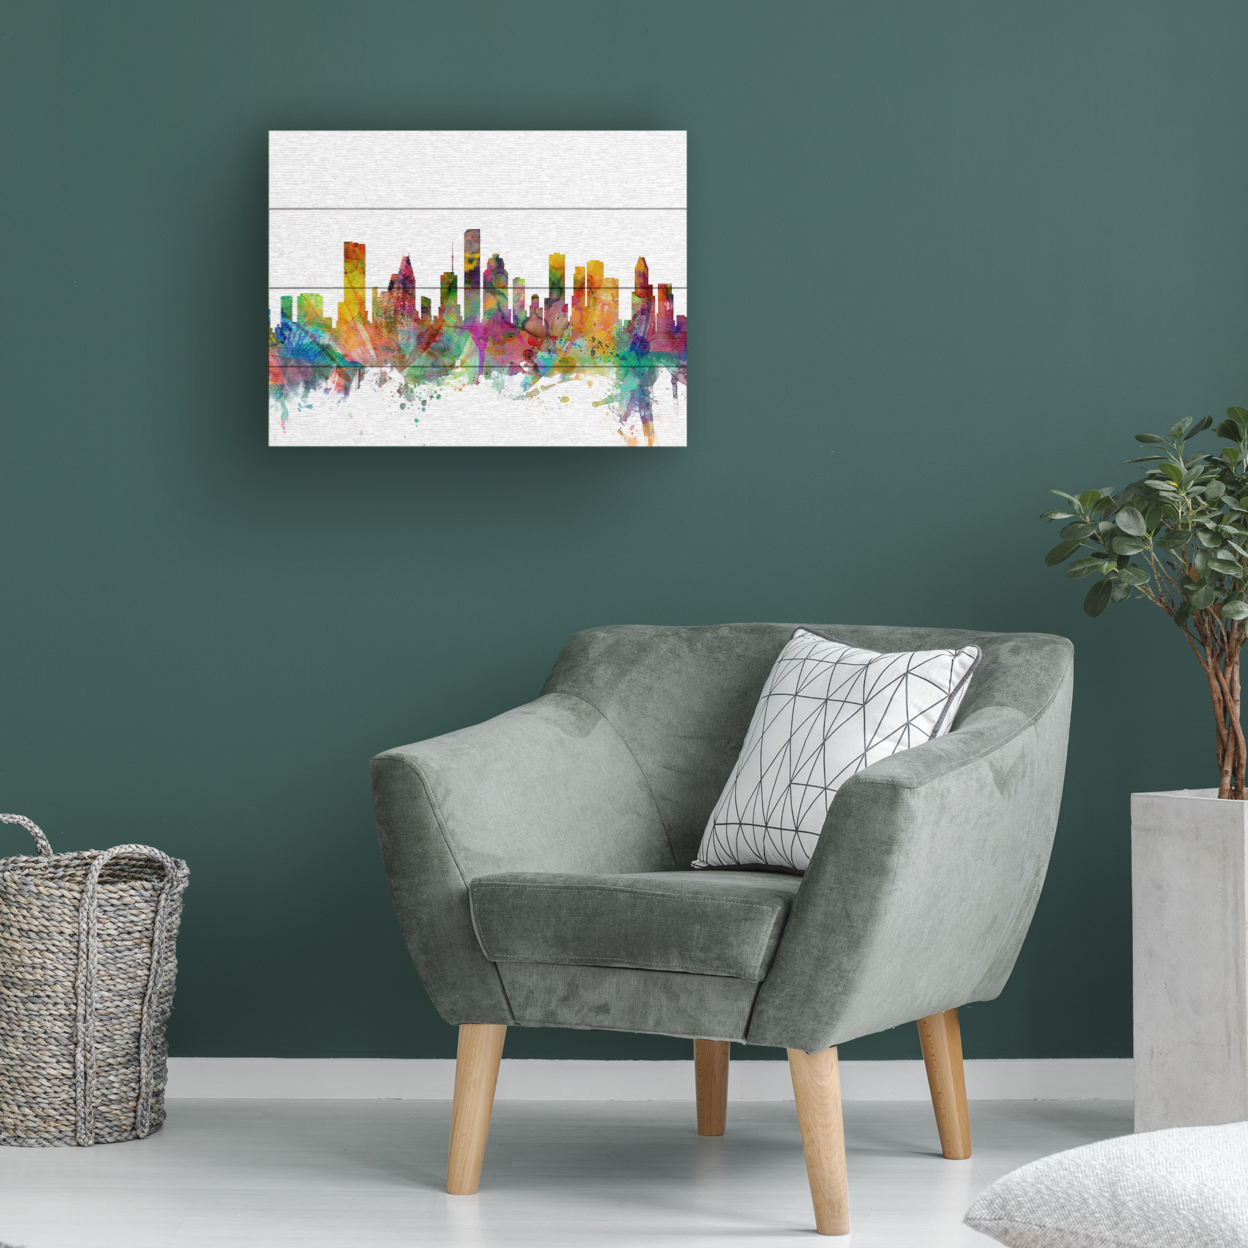 Wall Art 12 X 16 Inches Titled Houston Texas Skyline Ready To Hang Printed On Wooden Planks